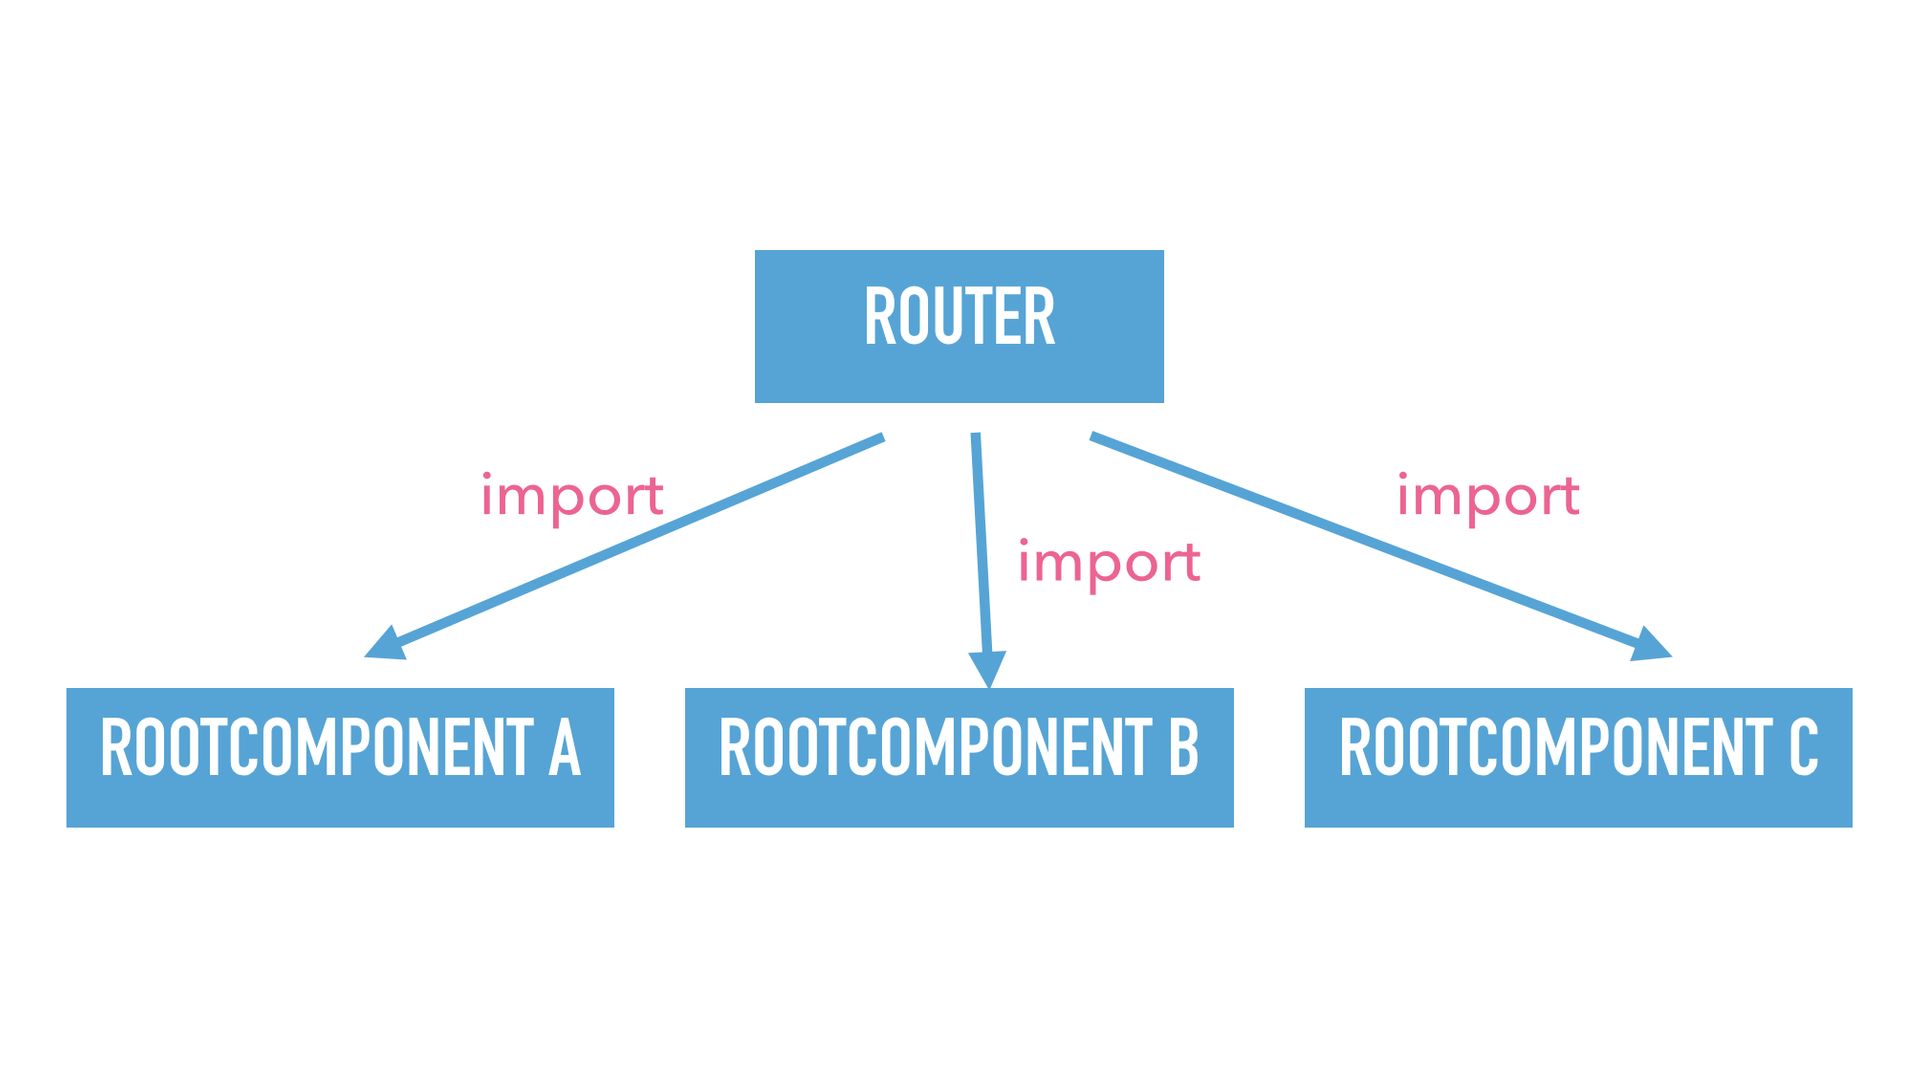 Slide text: Example dependency tree with router and 3 root components. Router imports root components.